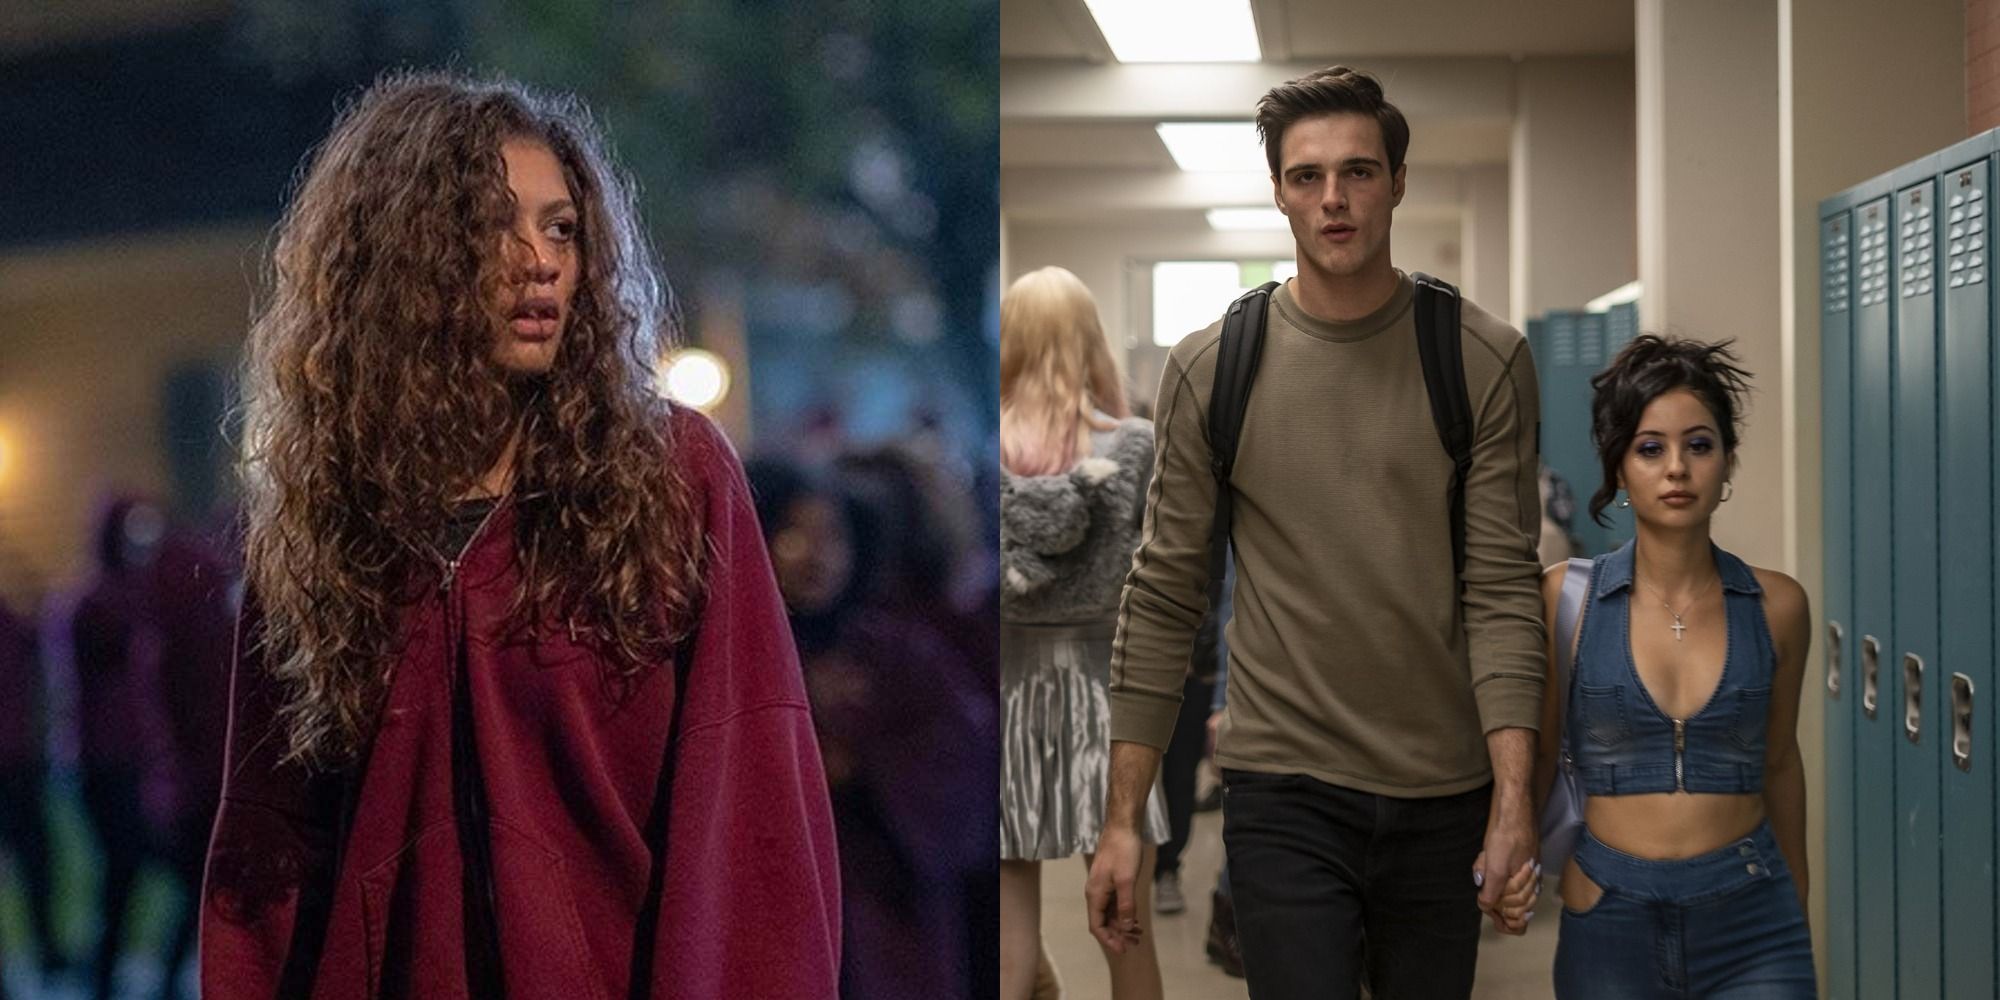 Split image of Rue in a hoodie and Nate walking with Maddy